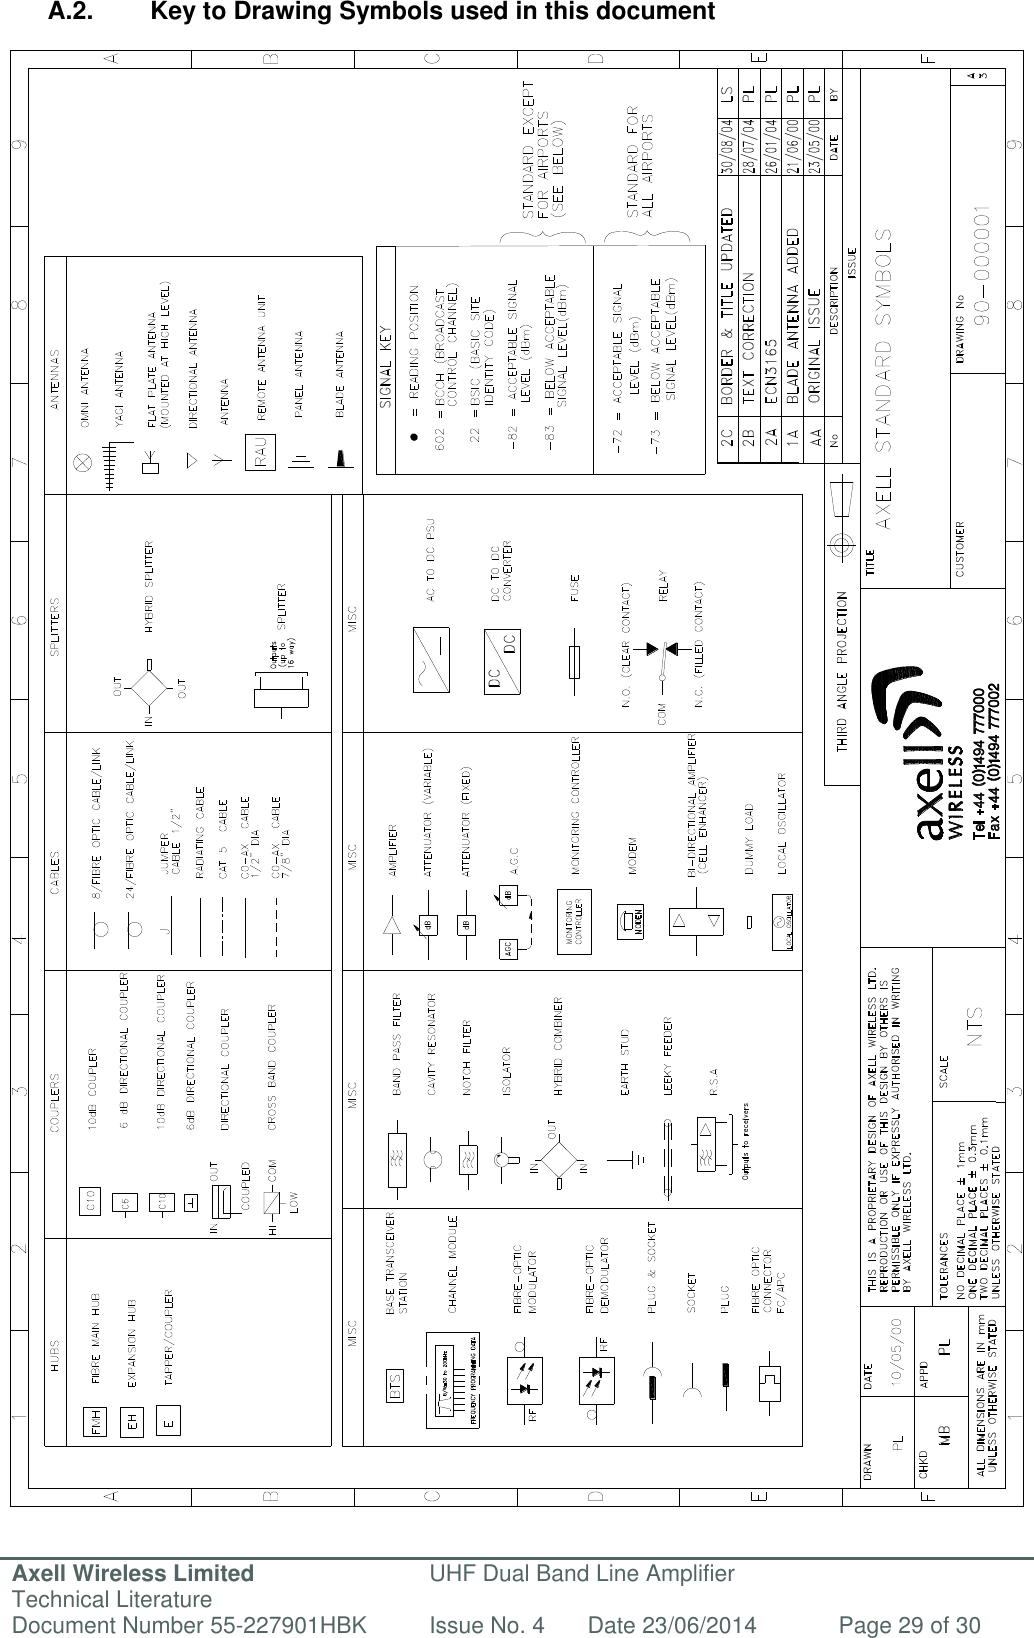 Axell Wireless Limited Technical Literature UHF Dual Band Line Amplifier Document Number 55-227901HBK Issue No. 4 Date 23/06/2014 Page 29 of 30   A.2.  Key to Drawing Symbols used in this document                                                            